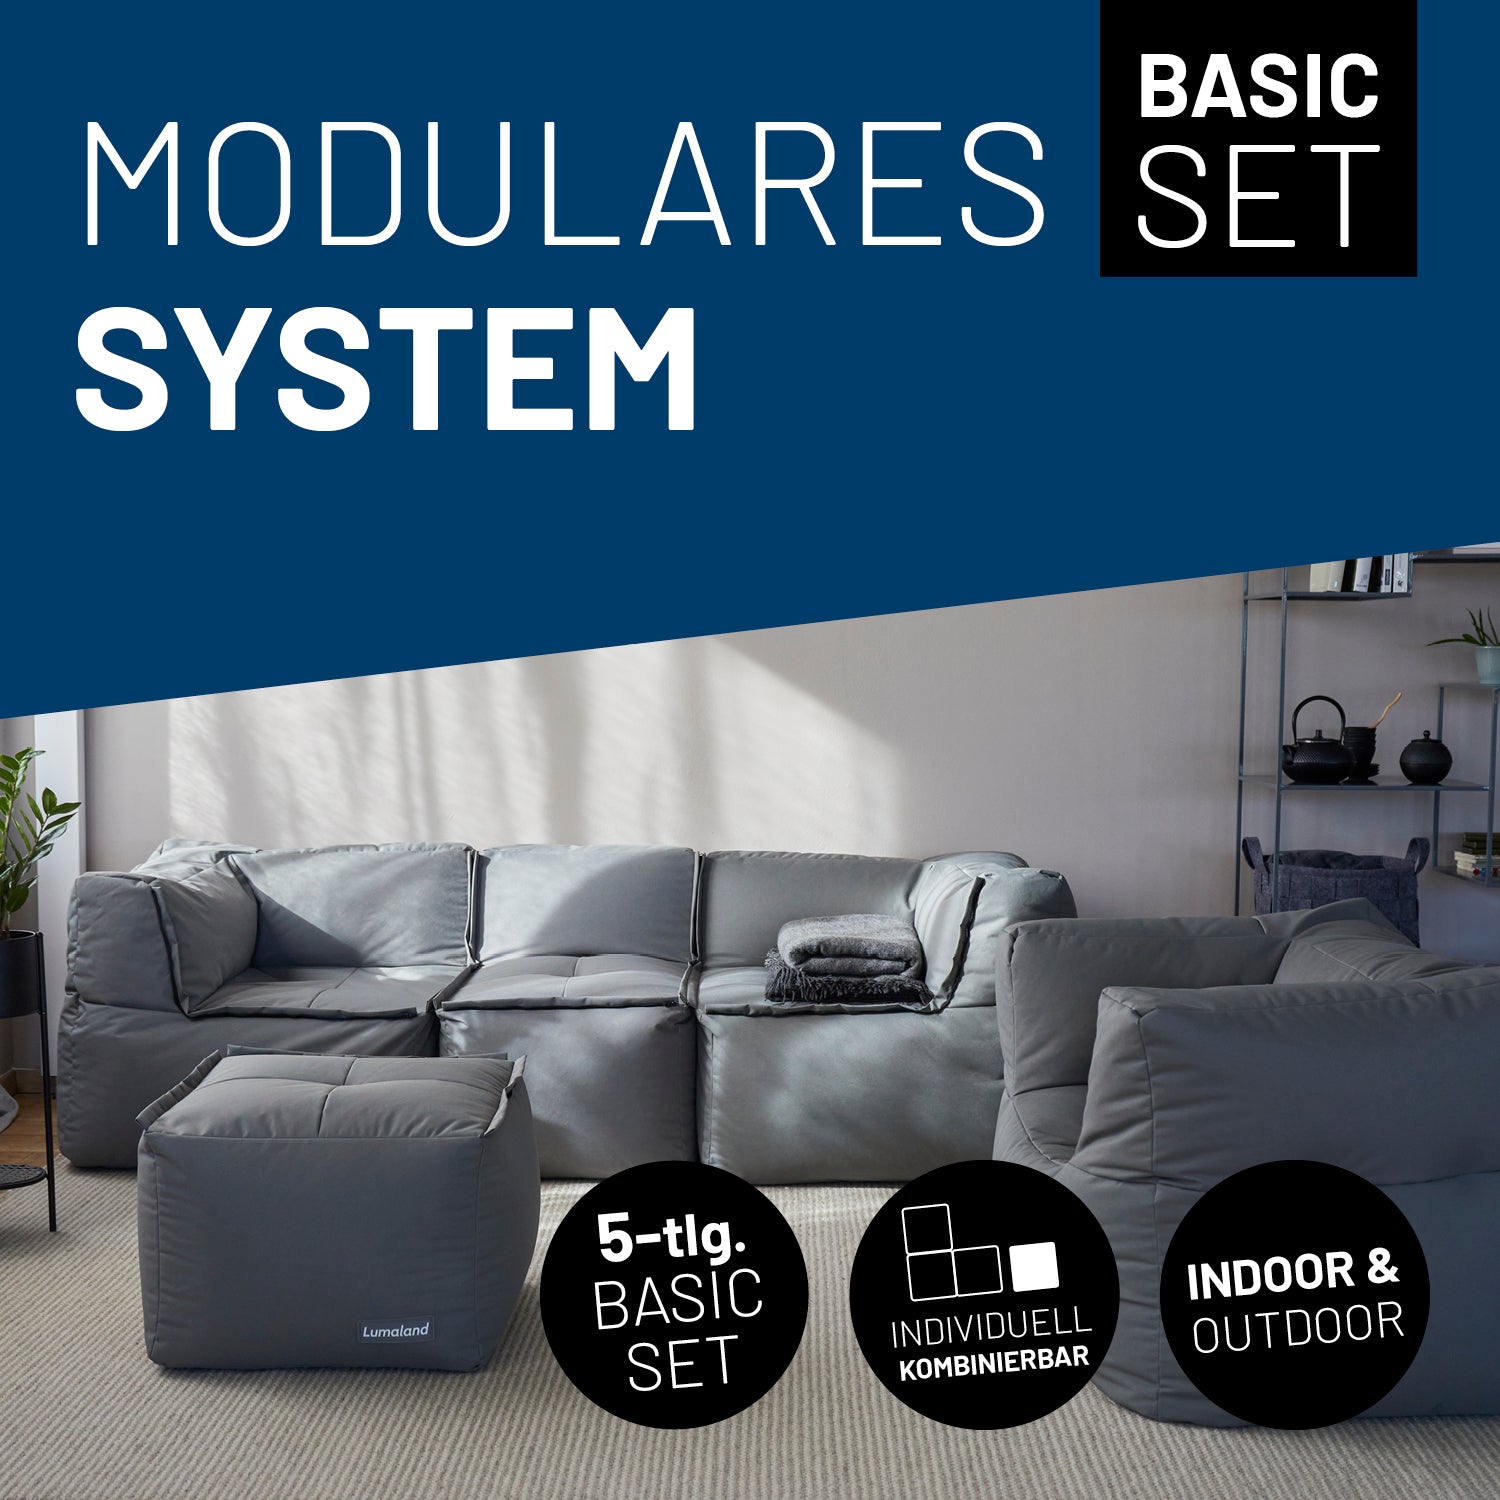 Basic Set (5-tlg.) - Modulares System - In- & outdoor